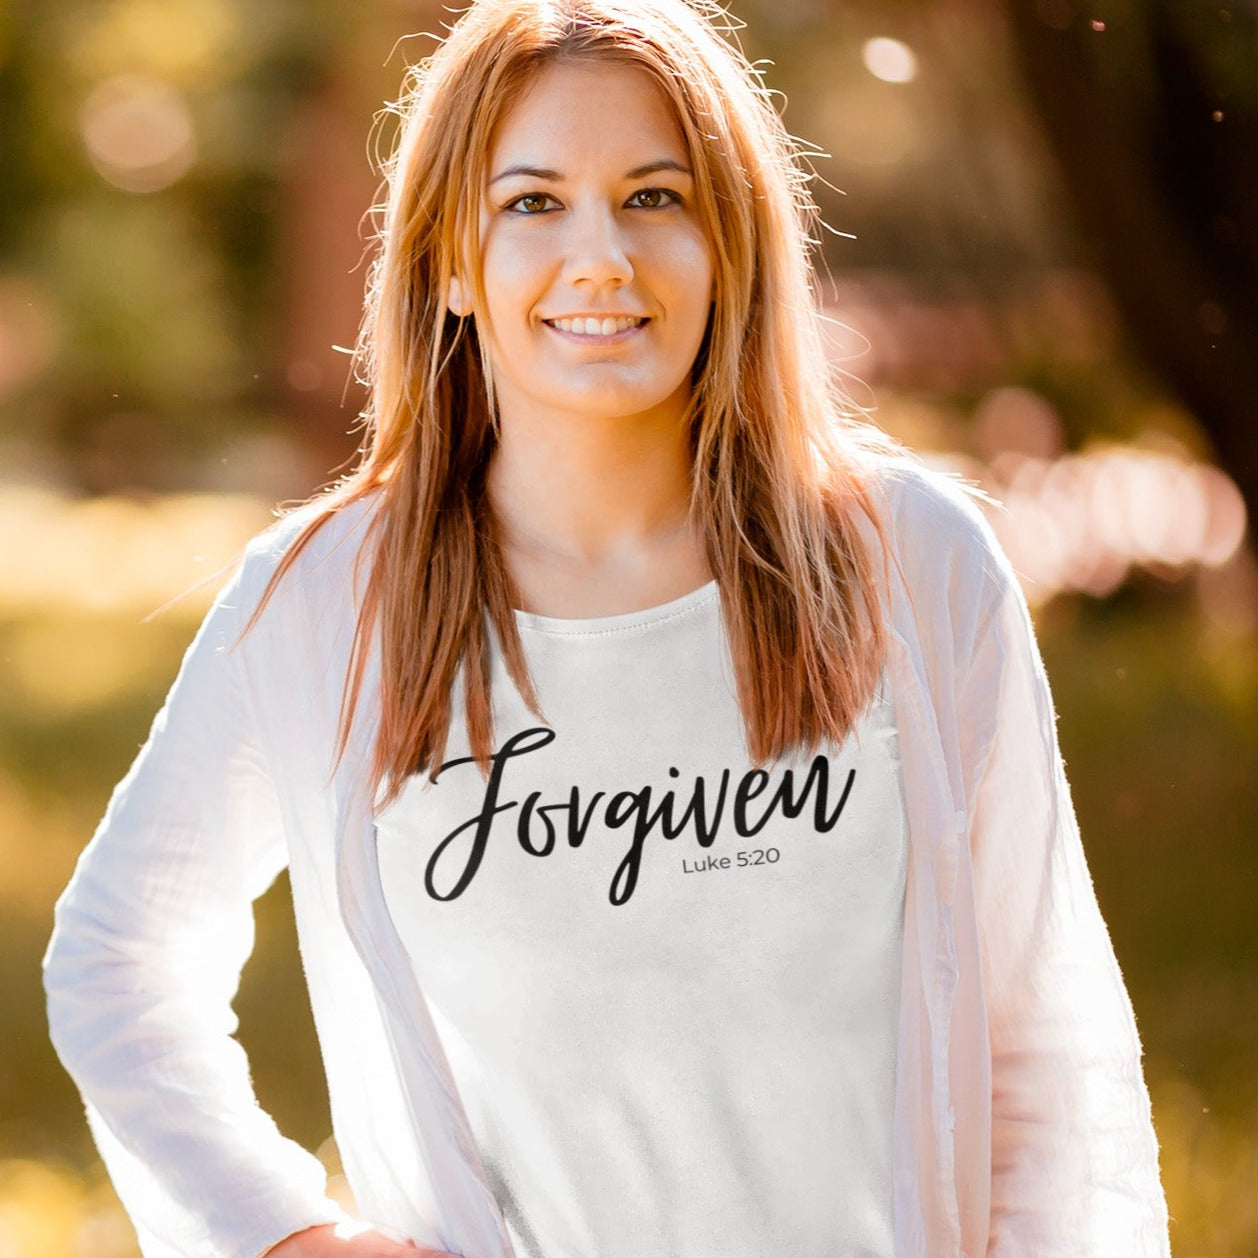 forgiven-luke-5-20-white-t-shirt-unisex-inspiring-christian-mockup-of-a-woman-with-a-basic-tee-posing-in-a-park